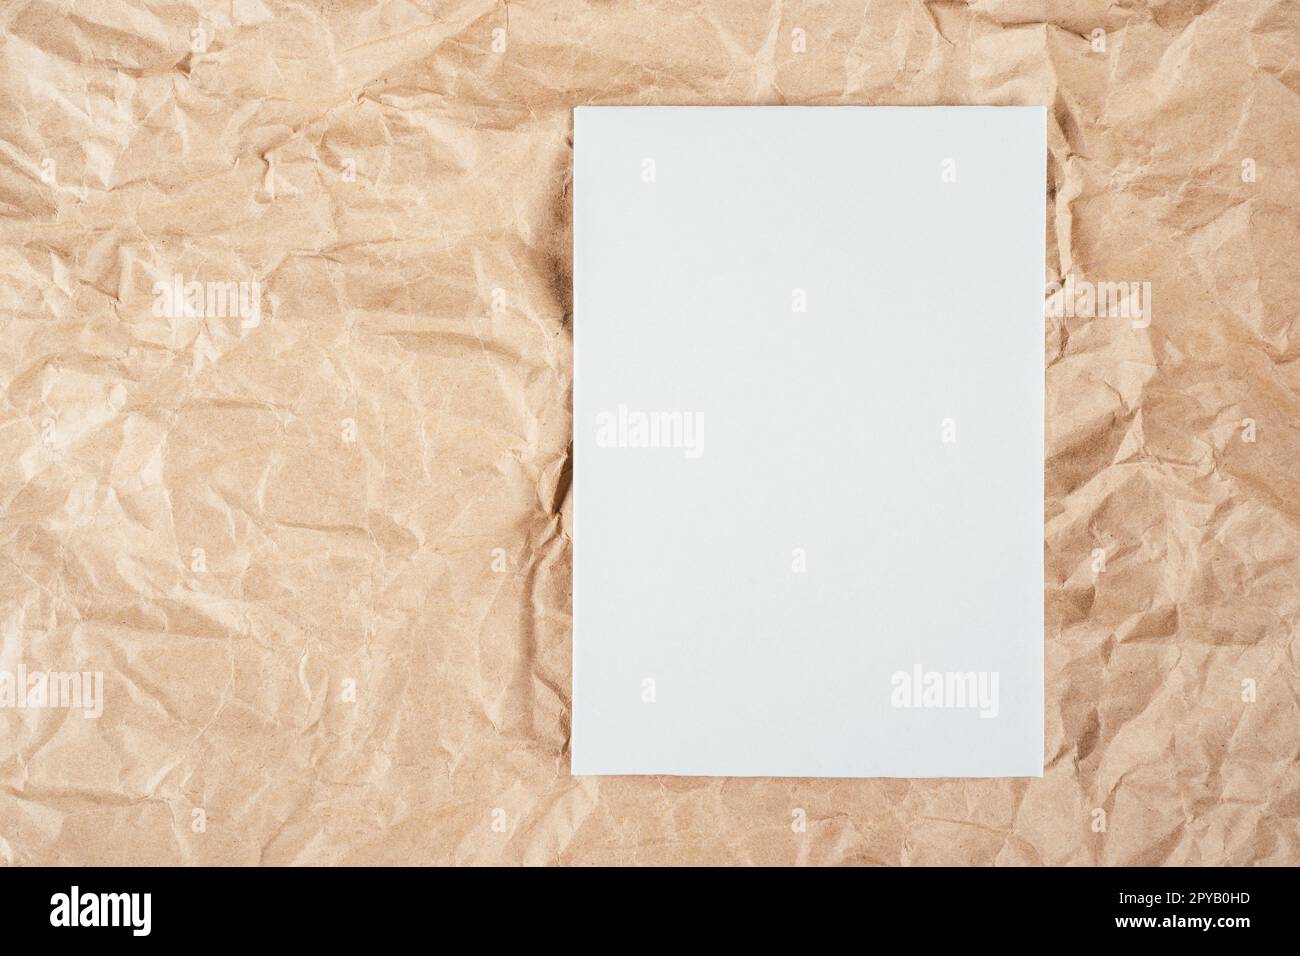 Background image of rough crumpled recycled textured kraft paper with sheet of white cardboard on side. Copy space Stock Photo